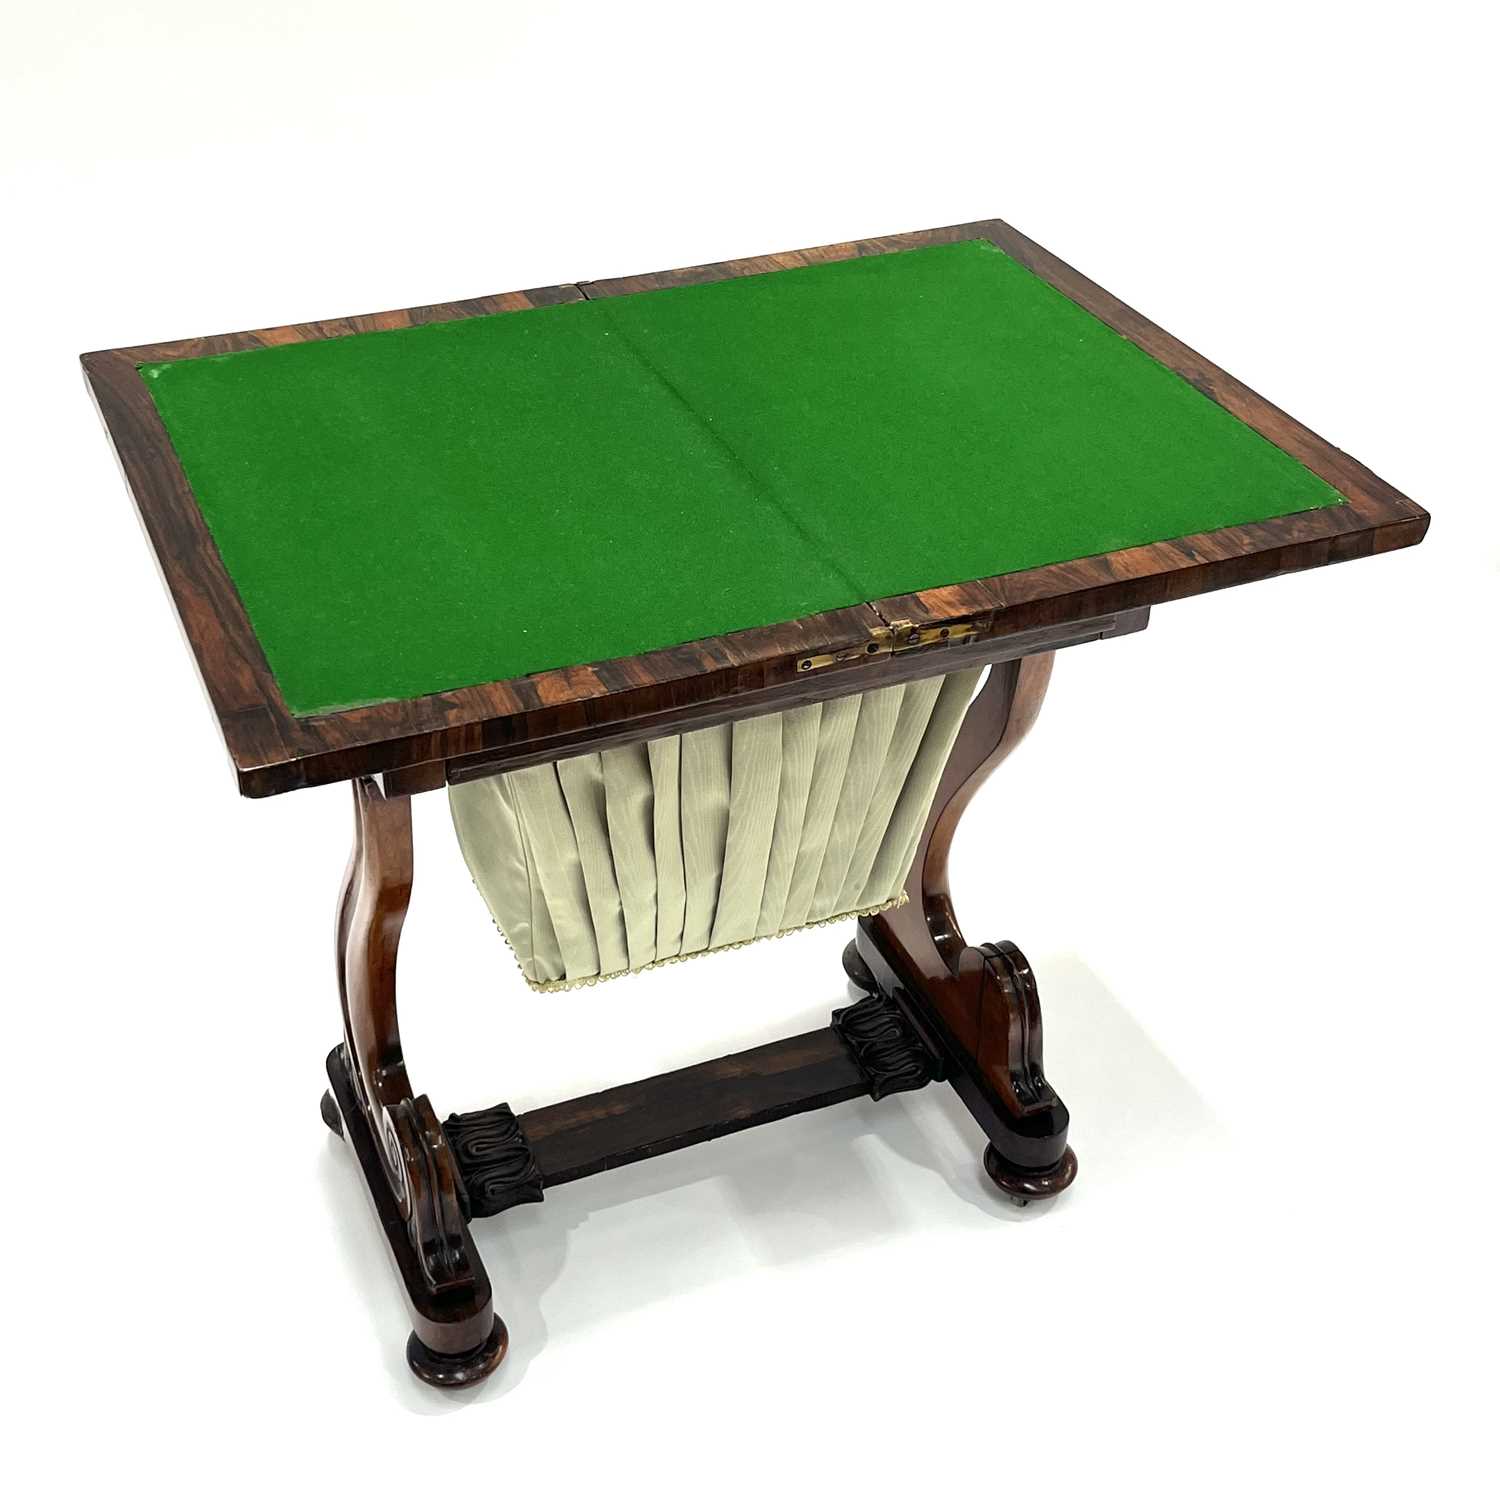 A Regency rosewood work and games table combined, circa 1820, fold-over top with green baize lining, - Image 4 of 6